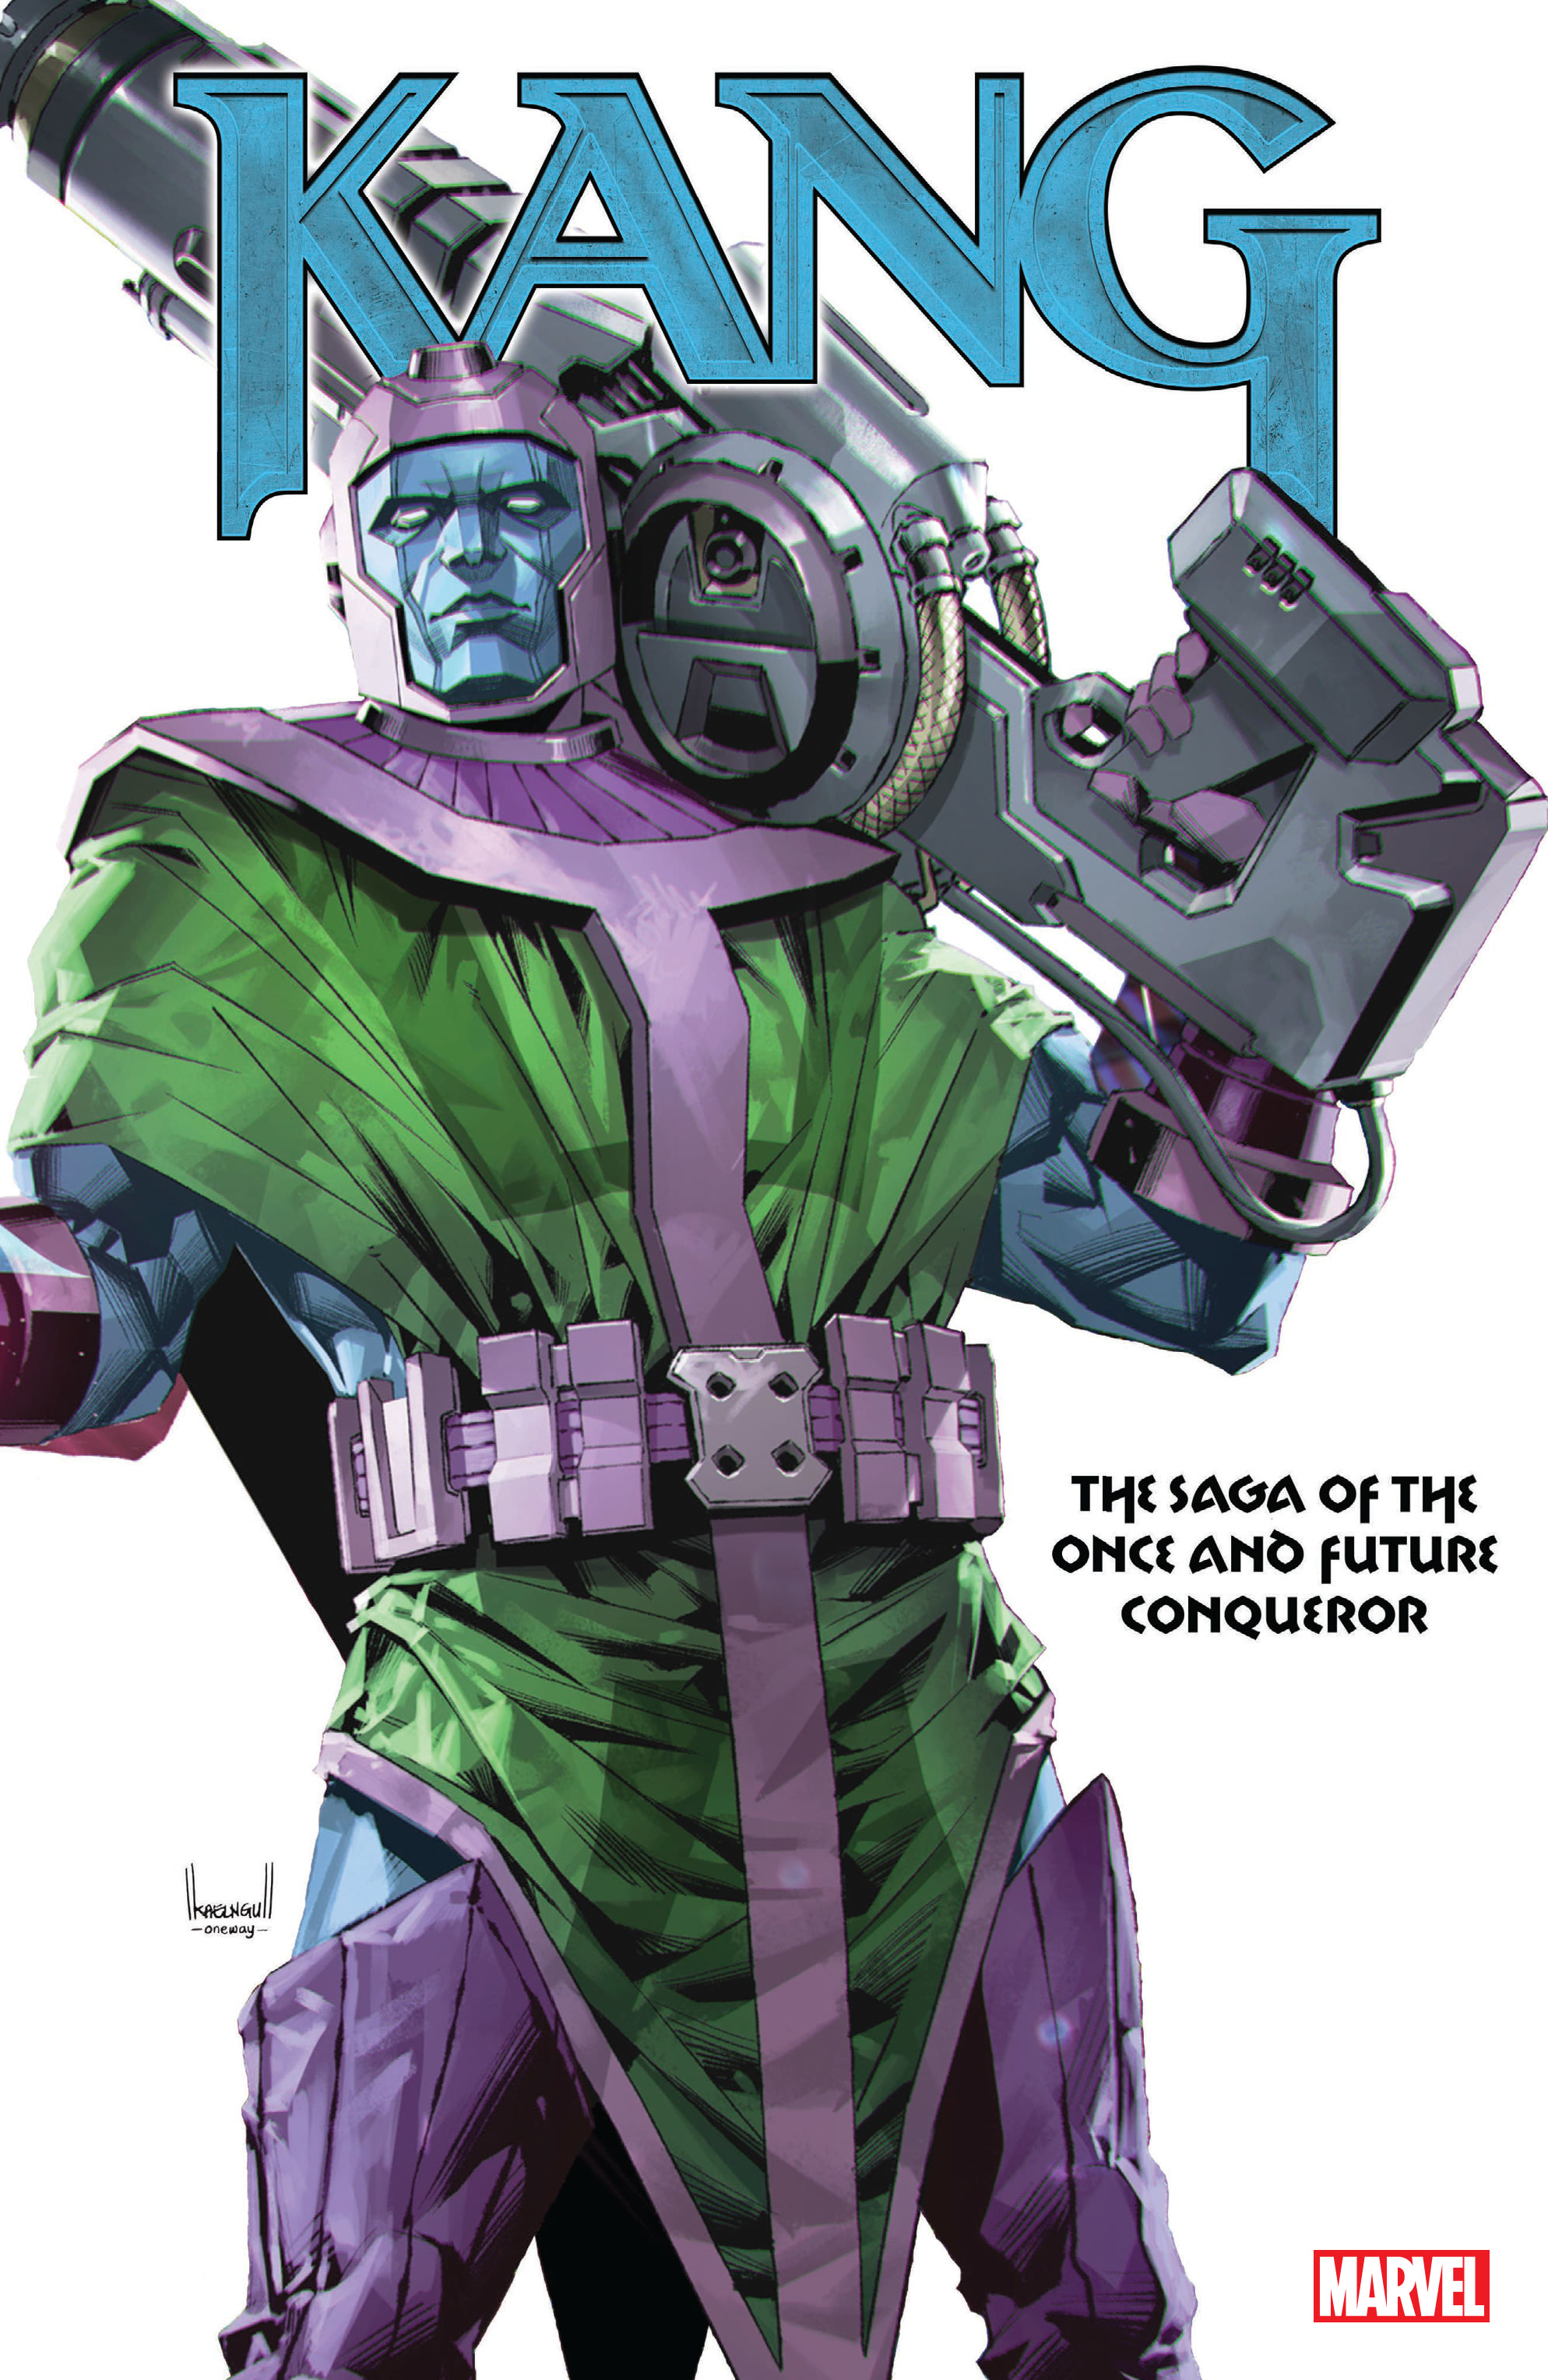 Read online Kang: The Saga of the Once and Future Conqueror comic -  Issue # TPB (Part 1) - 1